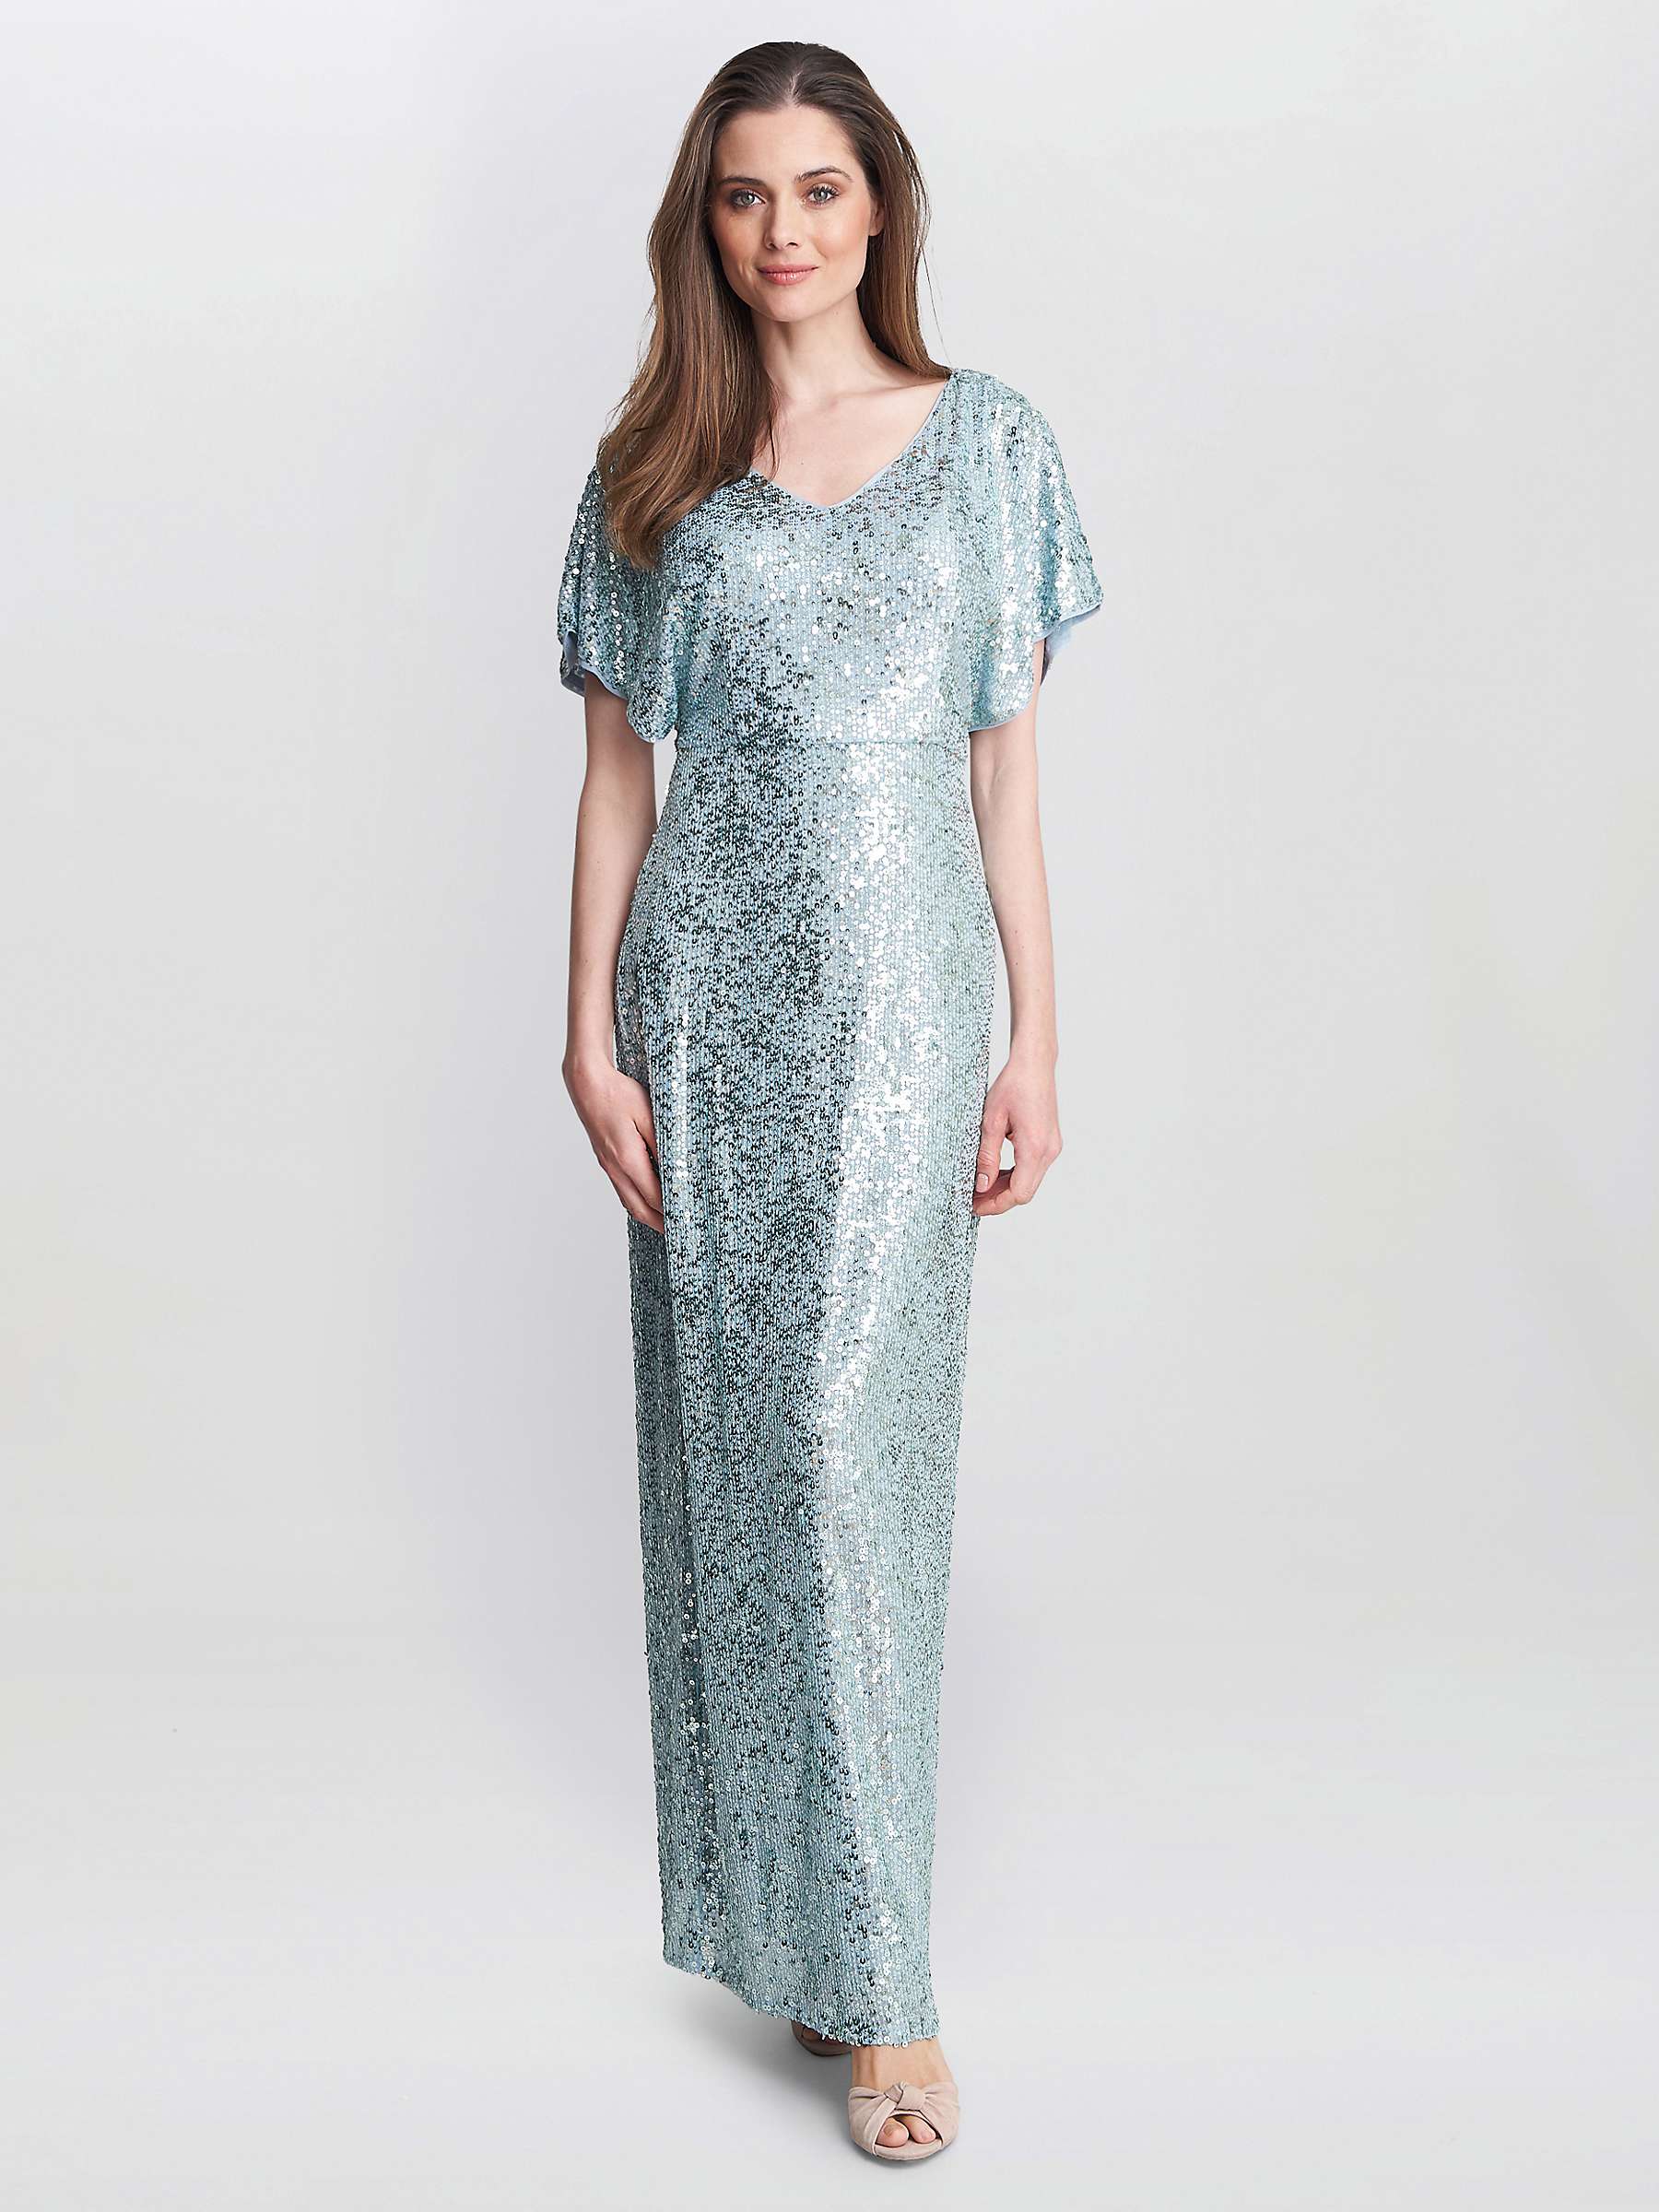 Buy Gina Bacconi Courtney Sequin Maxi Dress, Sky Blue Online at johnlewis.com